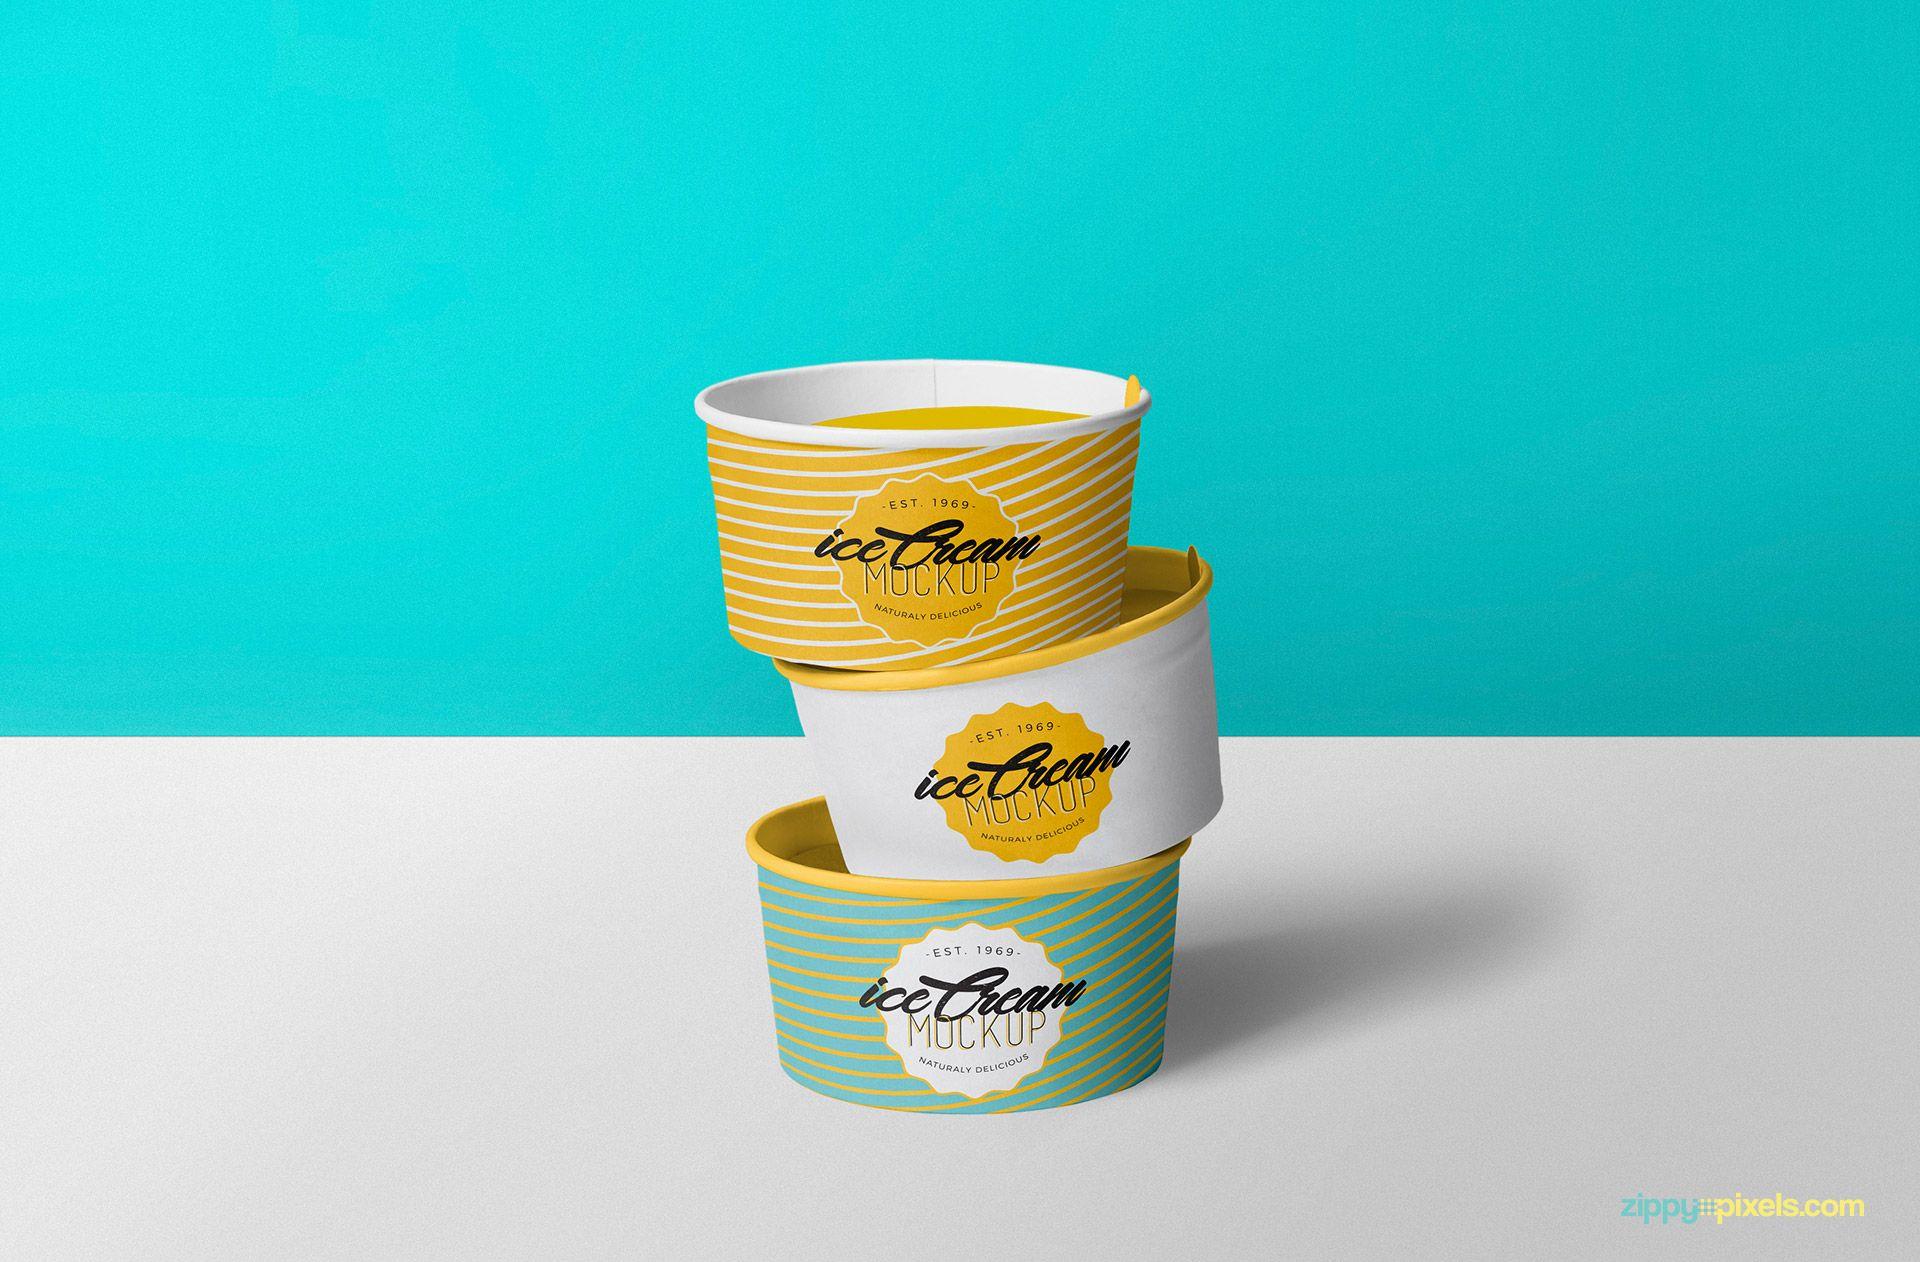 Coffe Cream Cup with Logo - Free Yummy Ice Cream Cup Mockup | ZippyPixels